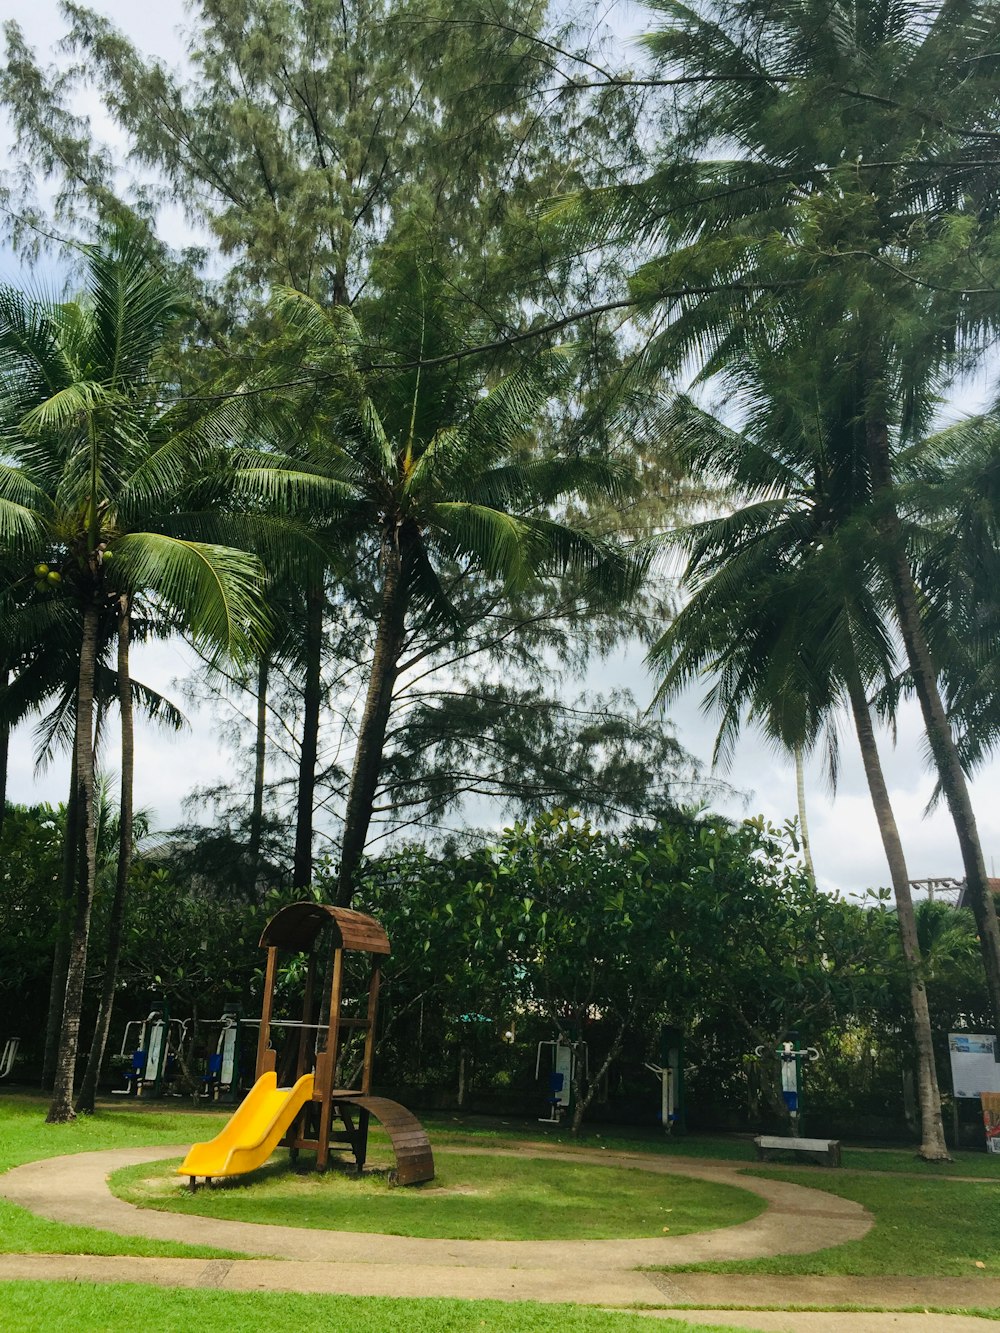 a yellow slide in a park